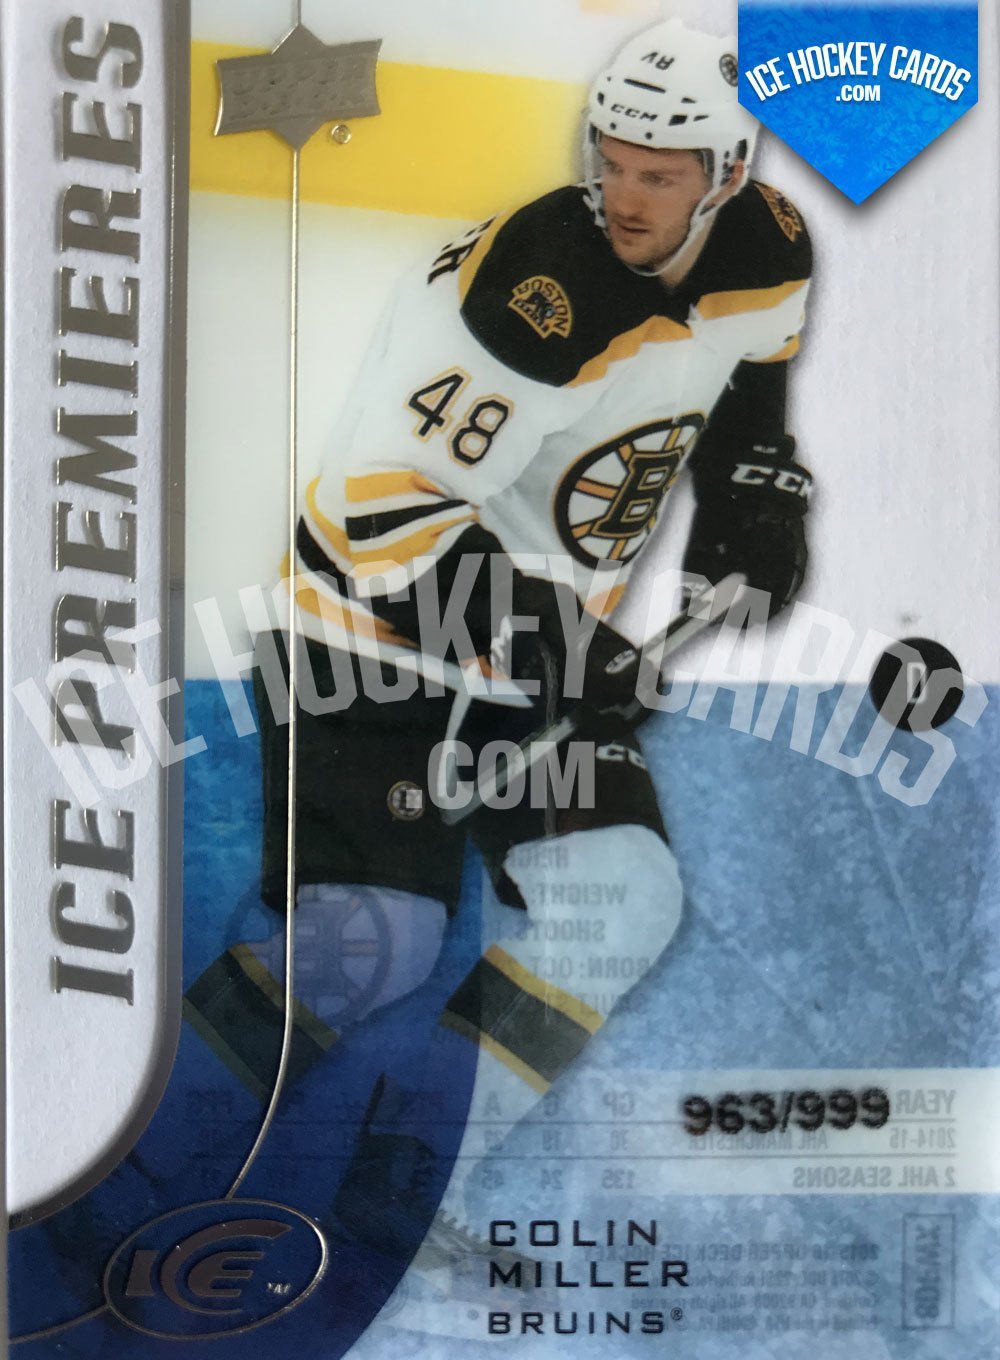 Upper Deck - ICE 15-16 - Colin Miller ICE Premieres RC